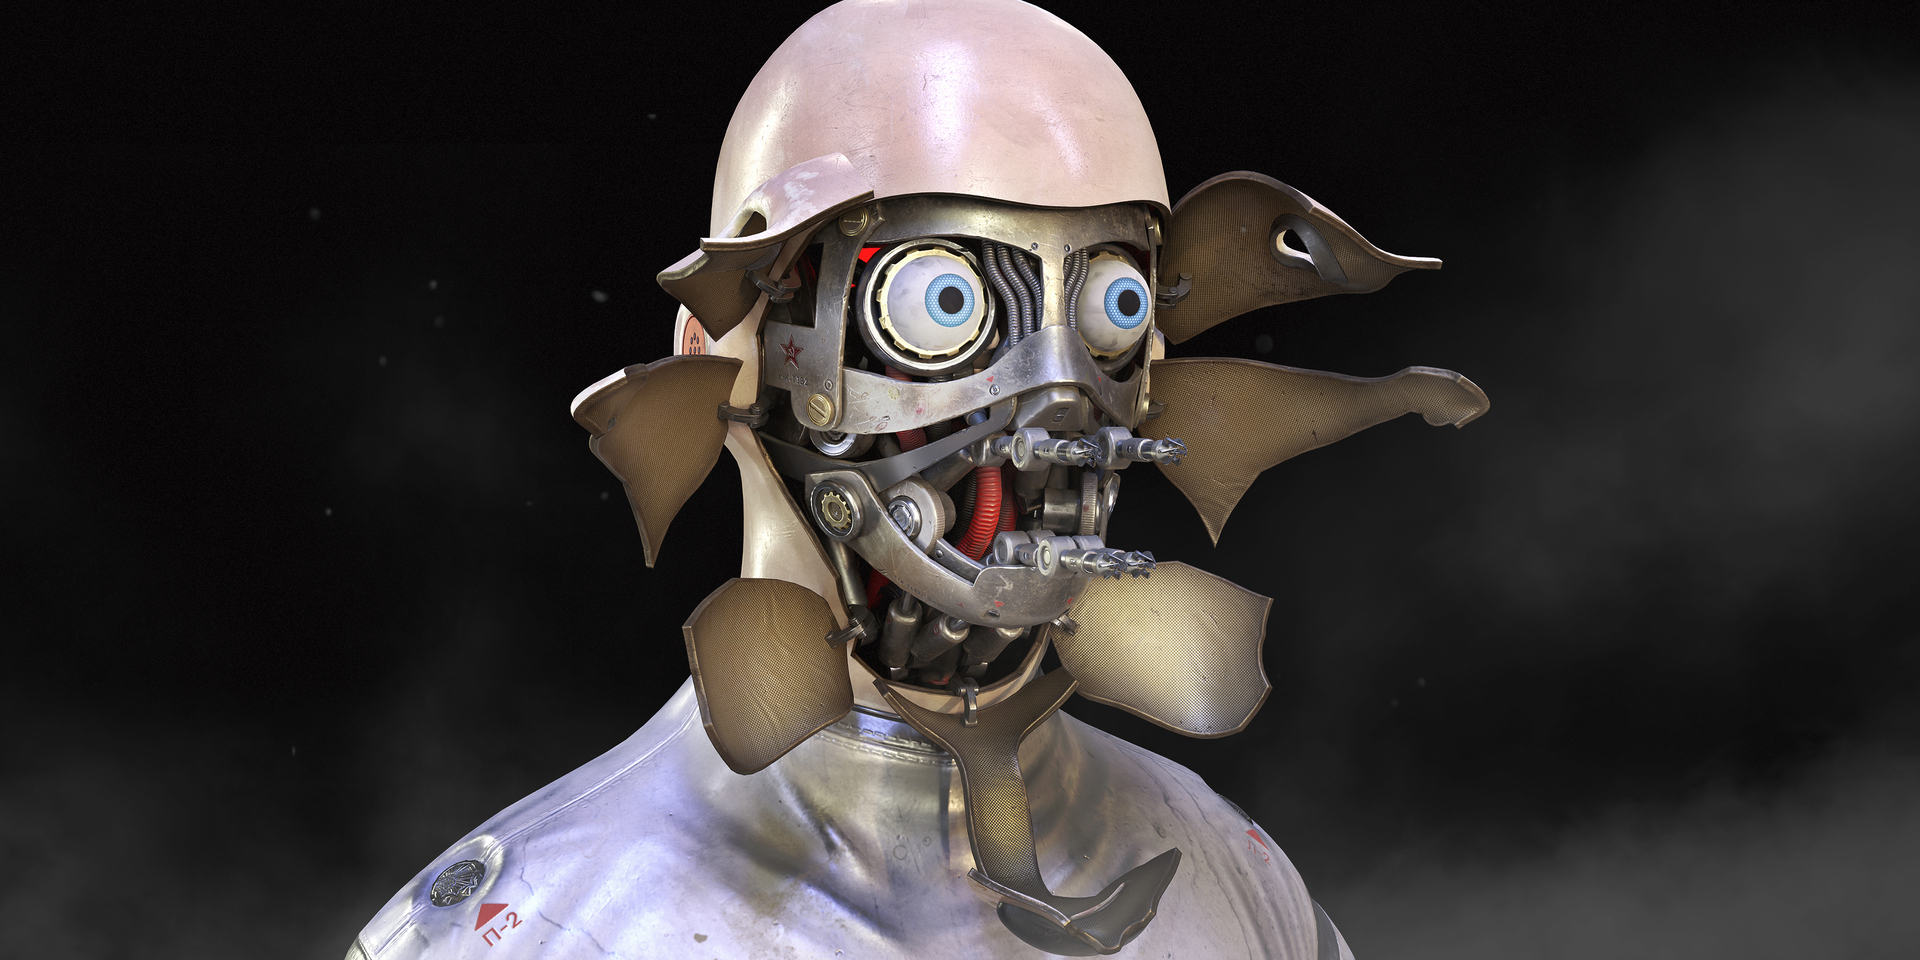 How to Beat the Vov-A6/CH Lab Tech Miniboss in Atomic Heart